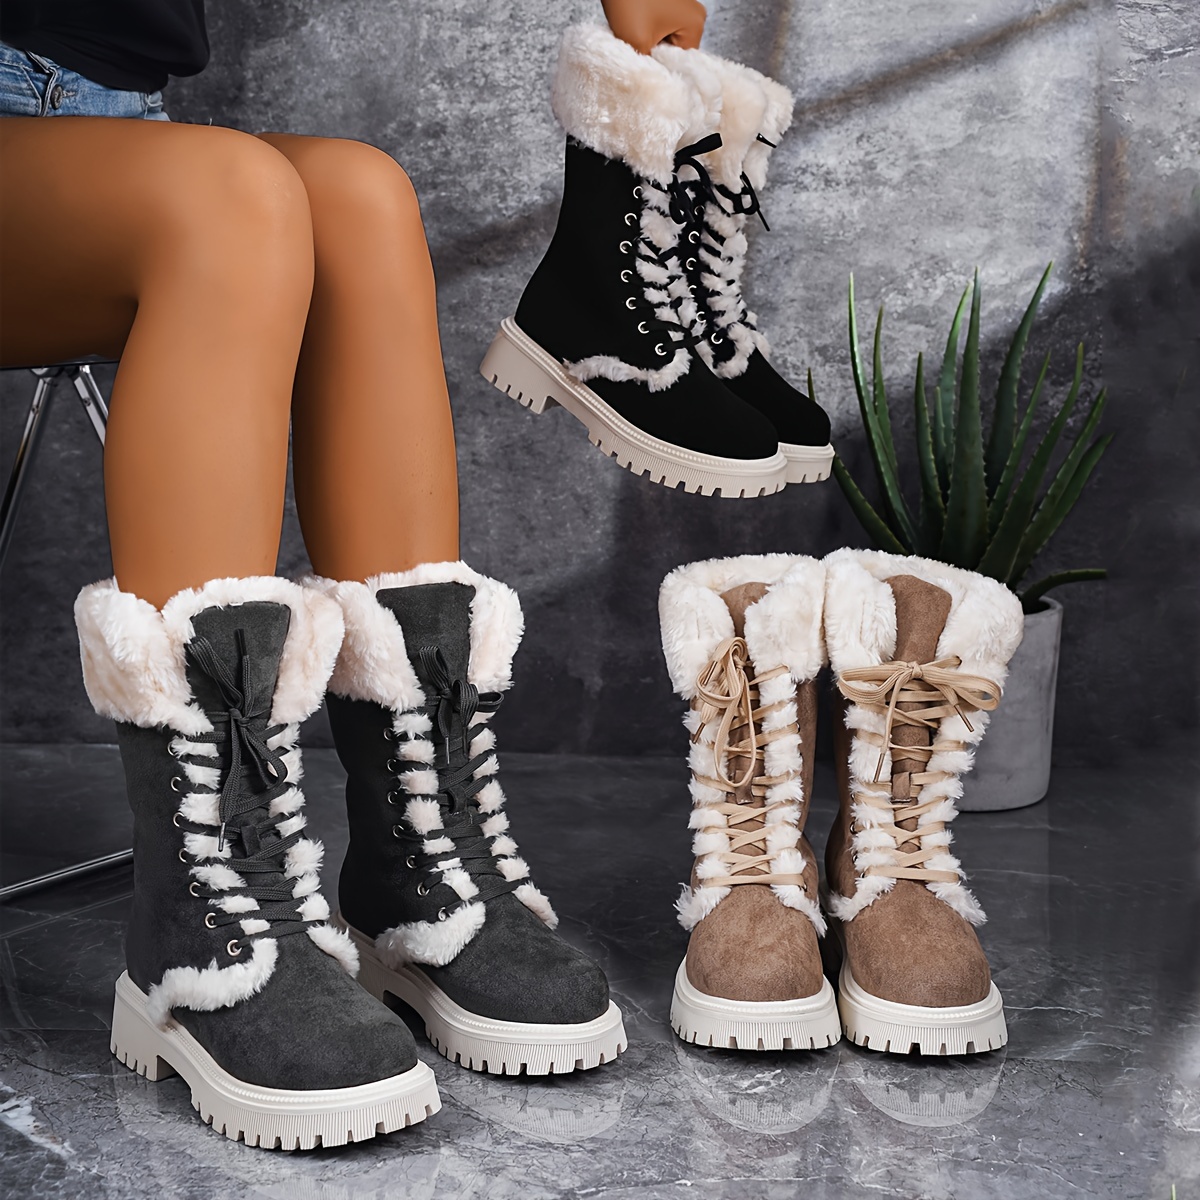 Women's Winter Thermal Outdoor Snow Boots, Lace Up Shoes, Women's Footwear